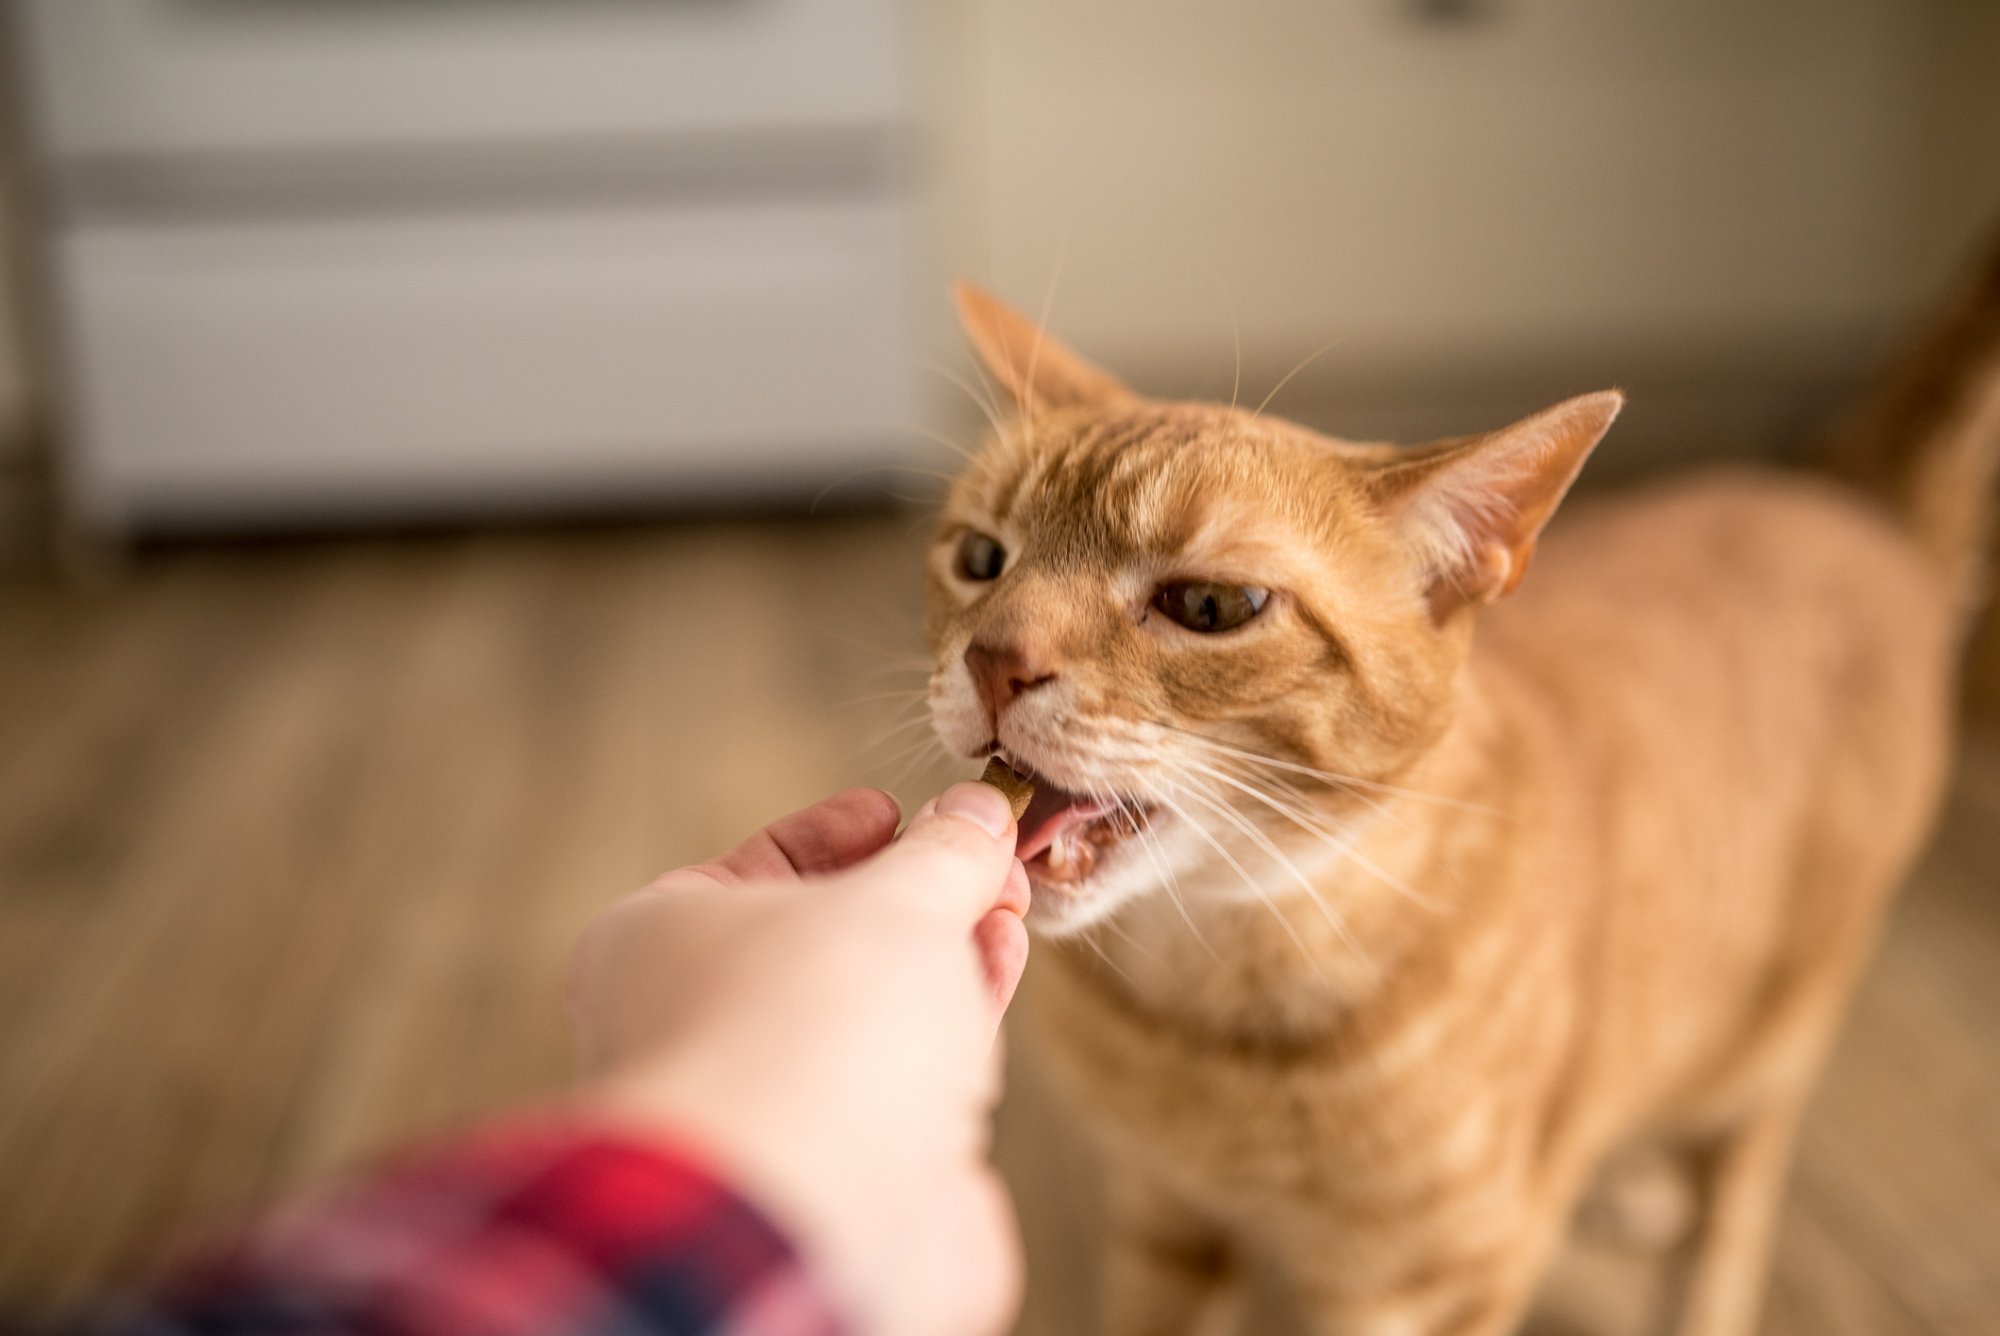 a ginger cat being fed a treat by hand